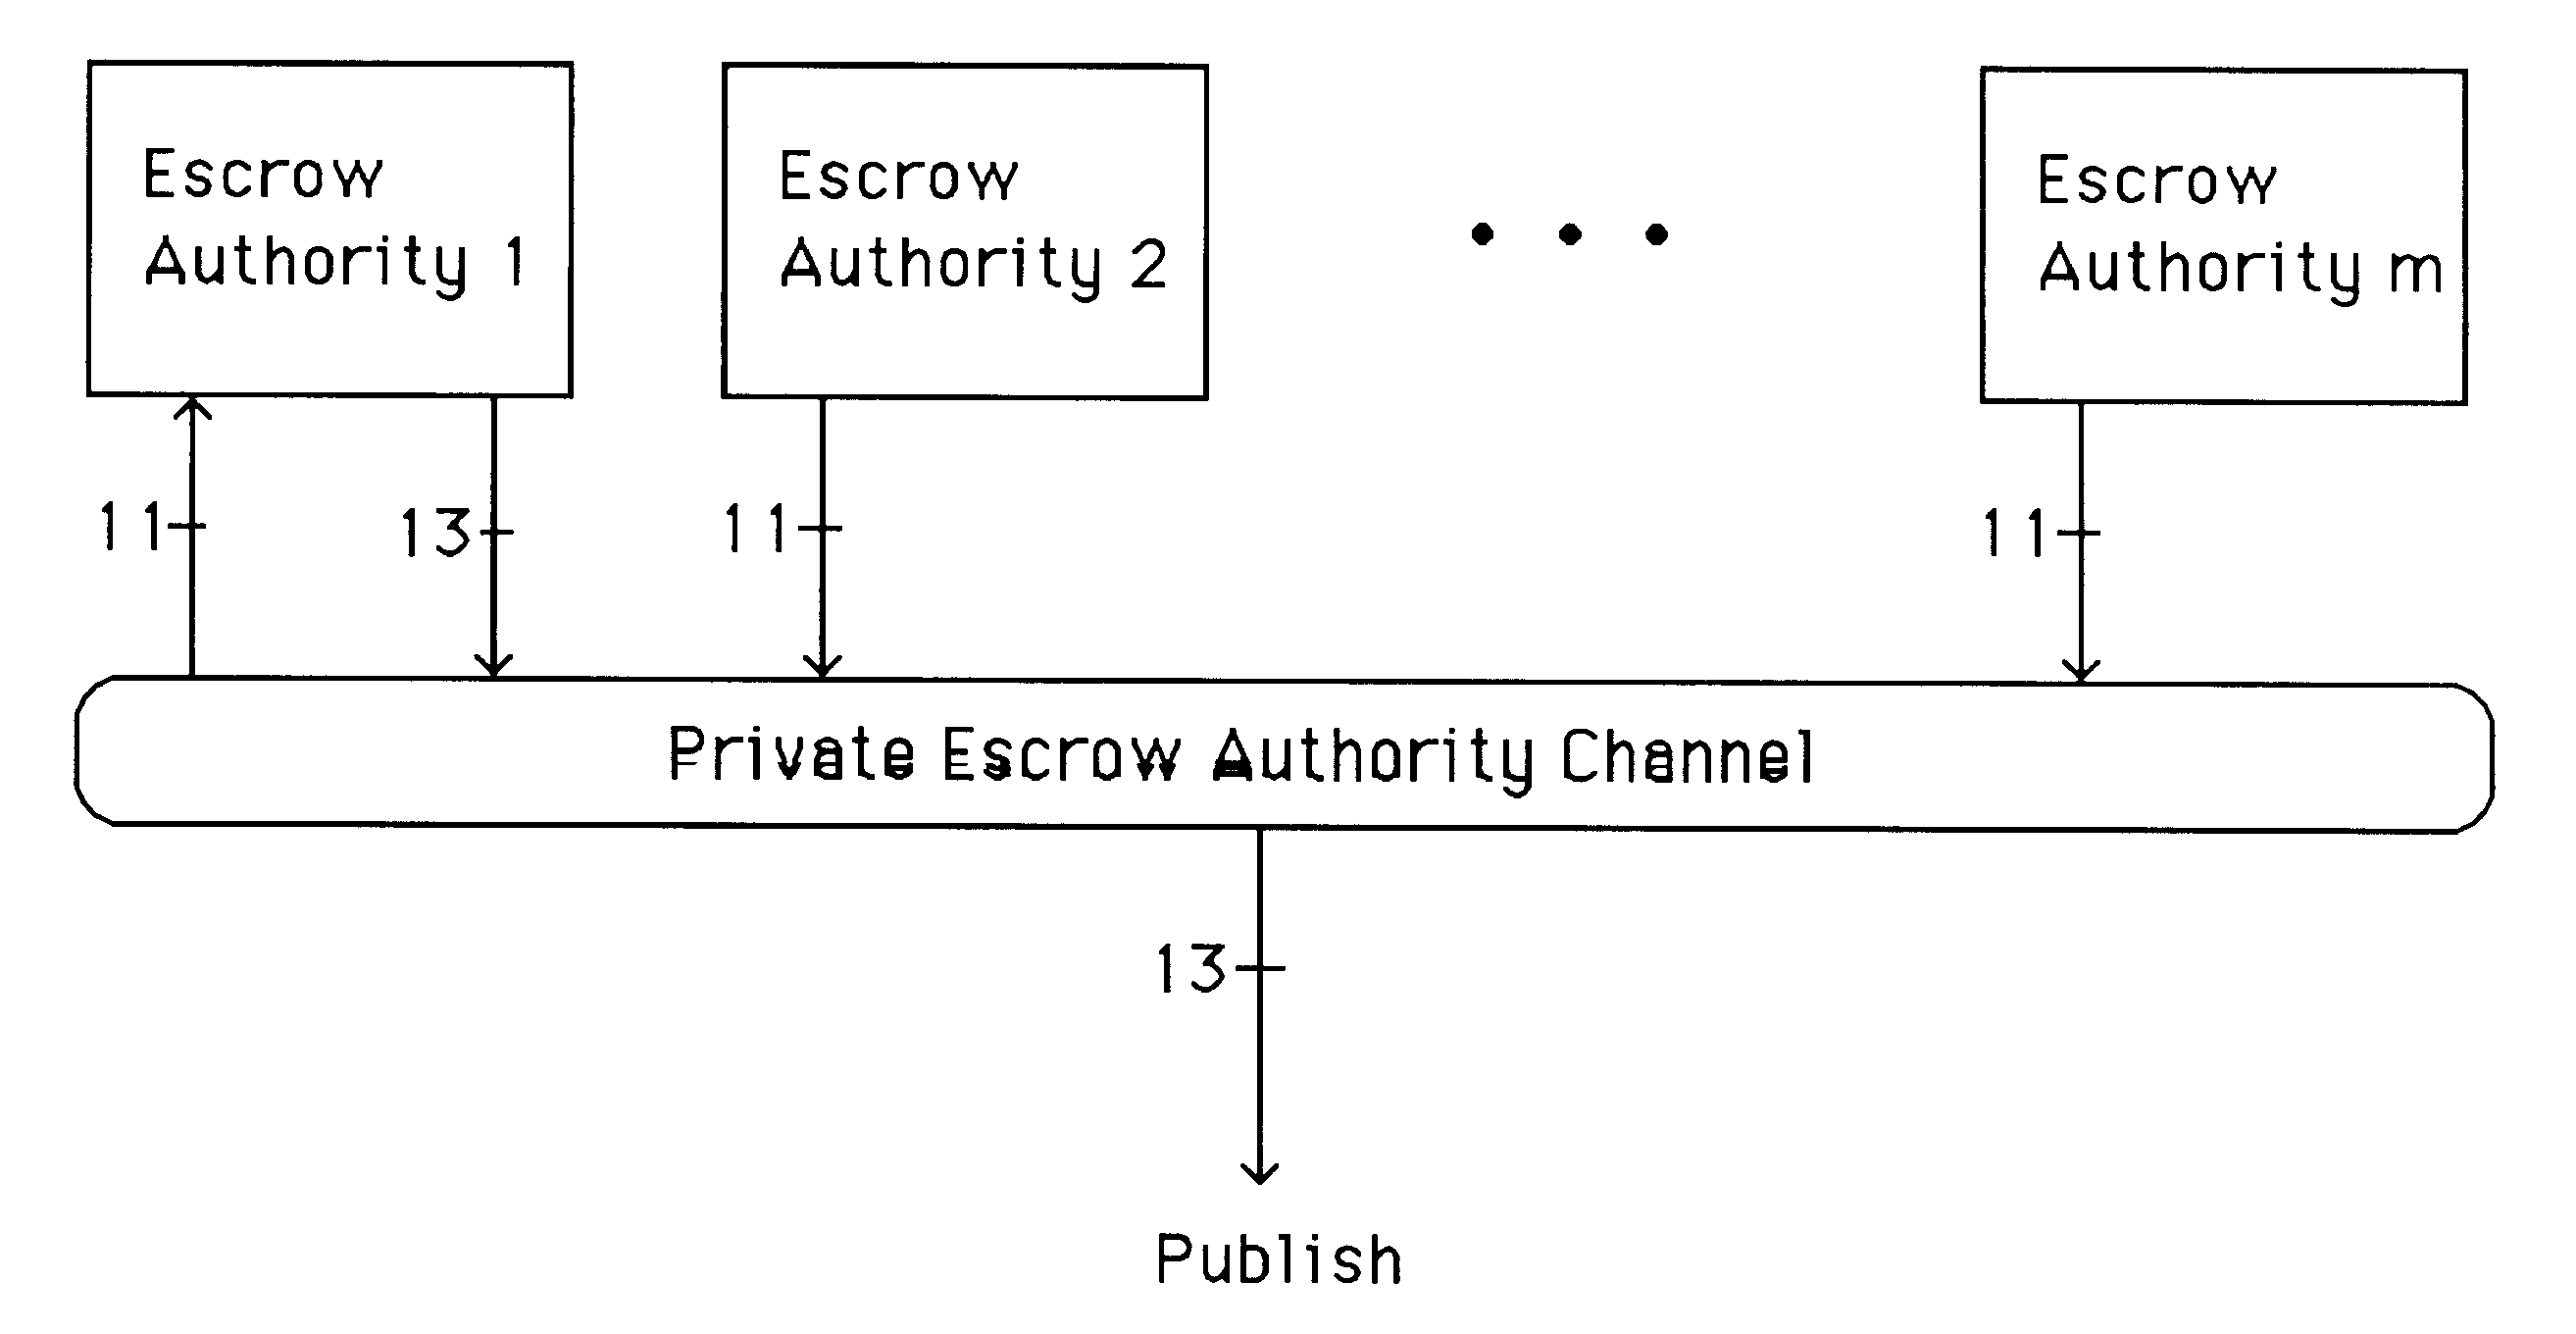 Auto-recoverable and auto-certifiable cryptostem using zero-knowledge proofs for key escrow in general exponential ciphers